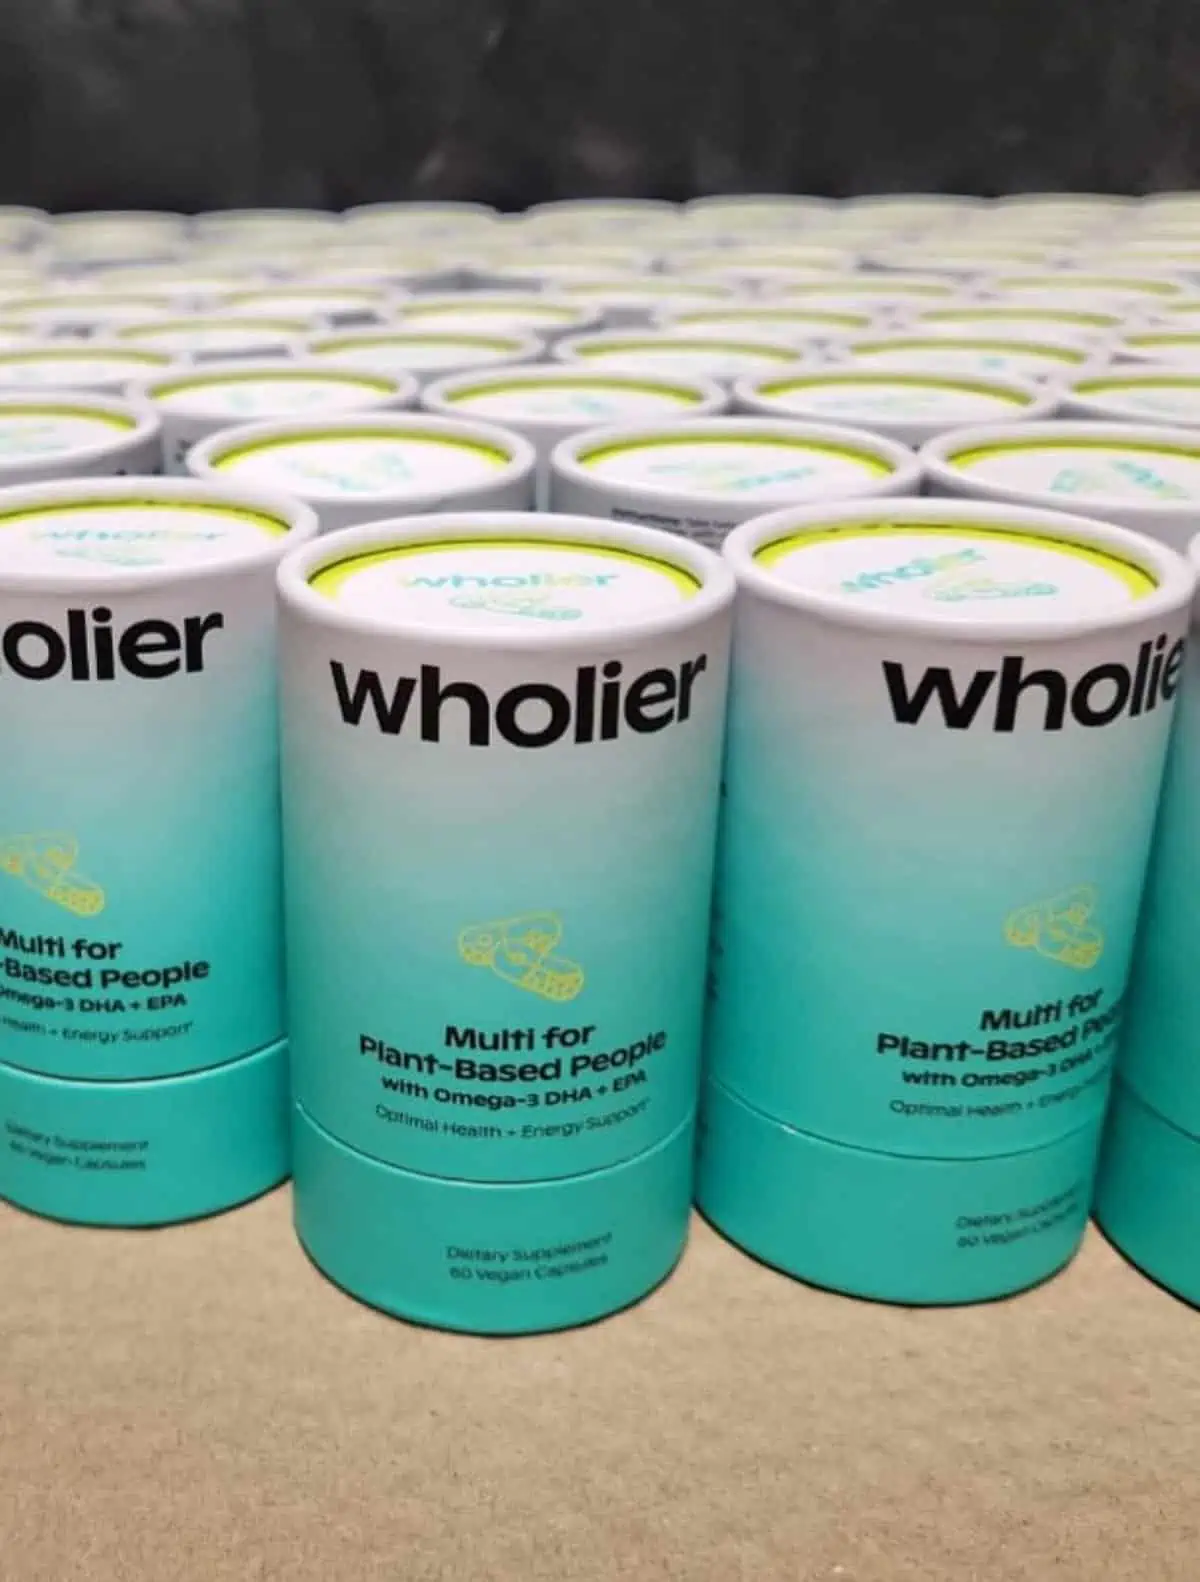 Containers of Wholier brand vegan multivitamins.